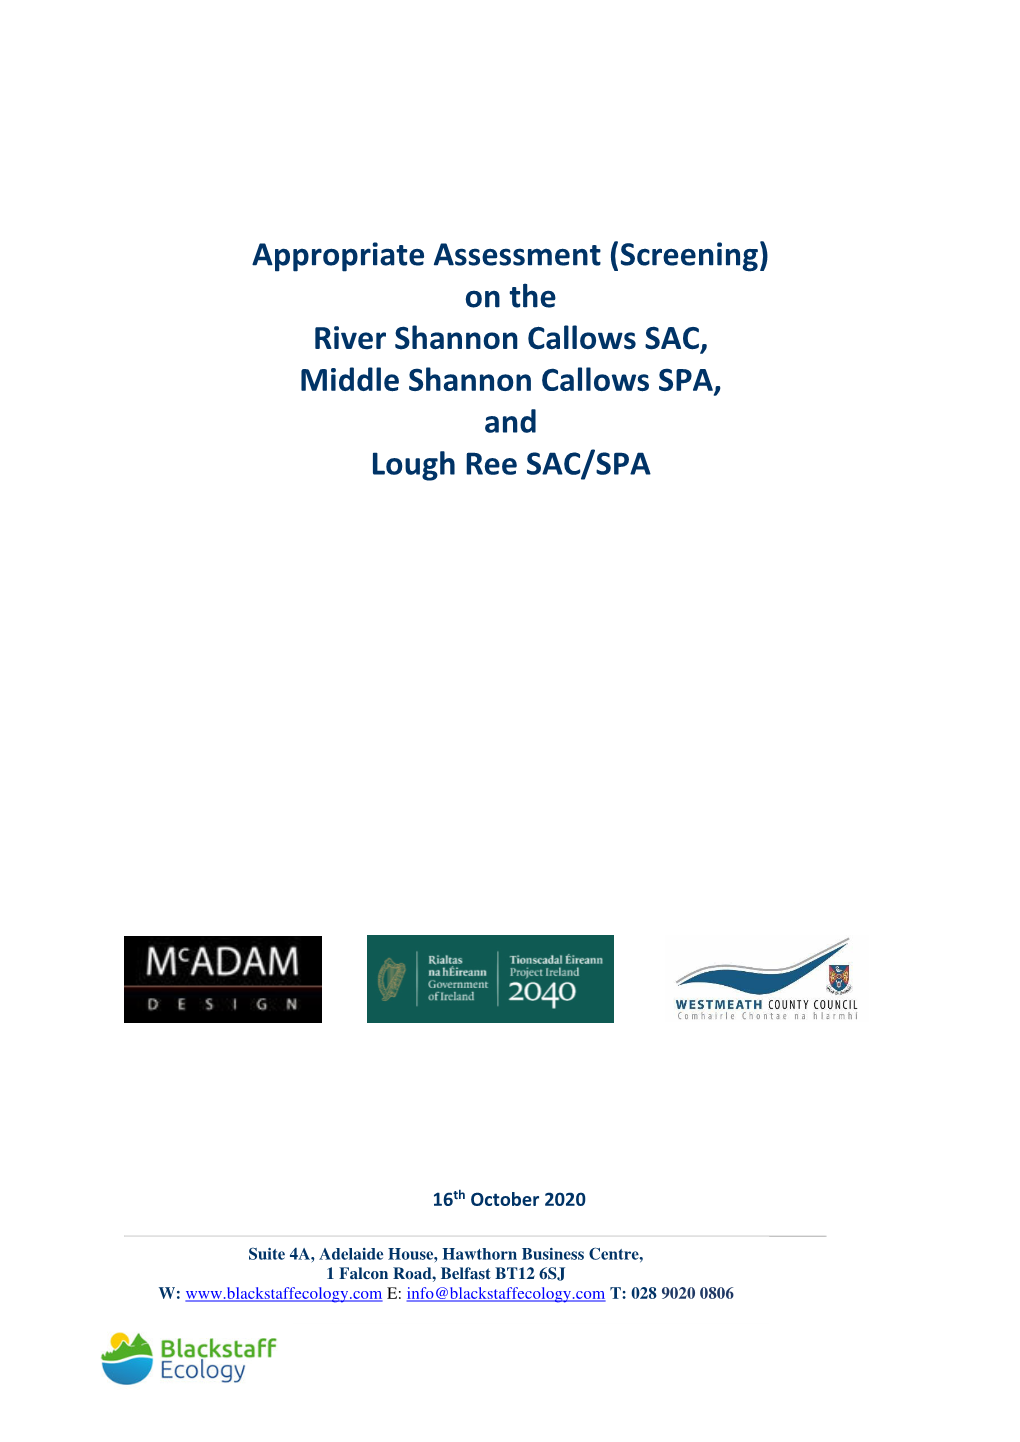 Appropriate Assessment (Screening) on the River Shannon Callows SAC, Middle Shannon Callows SPA, and Lough Ree SAC/SPA